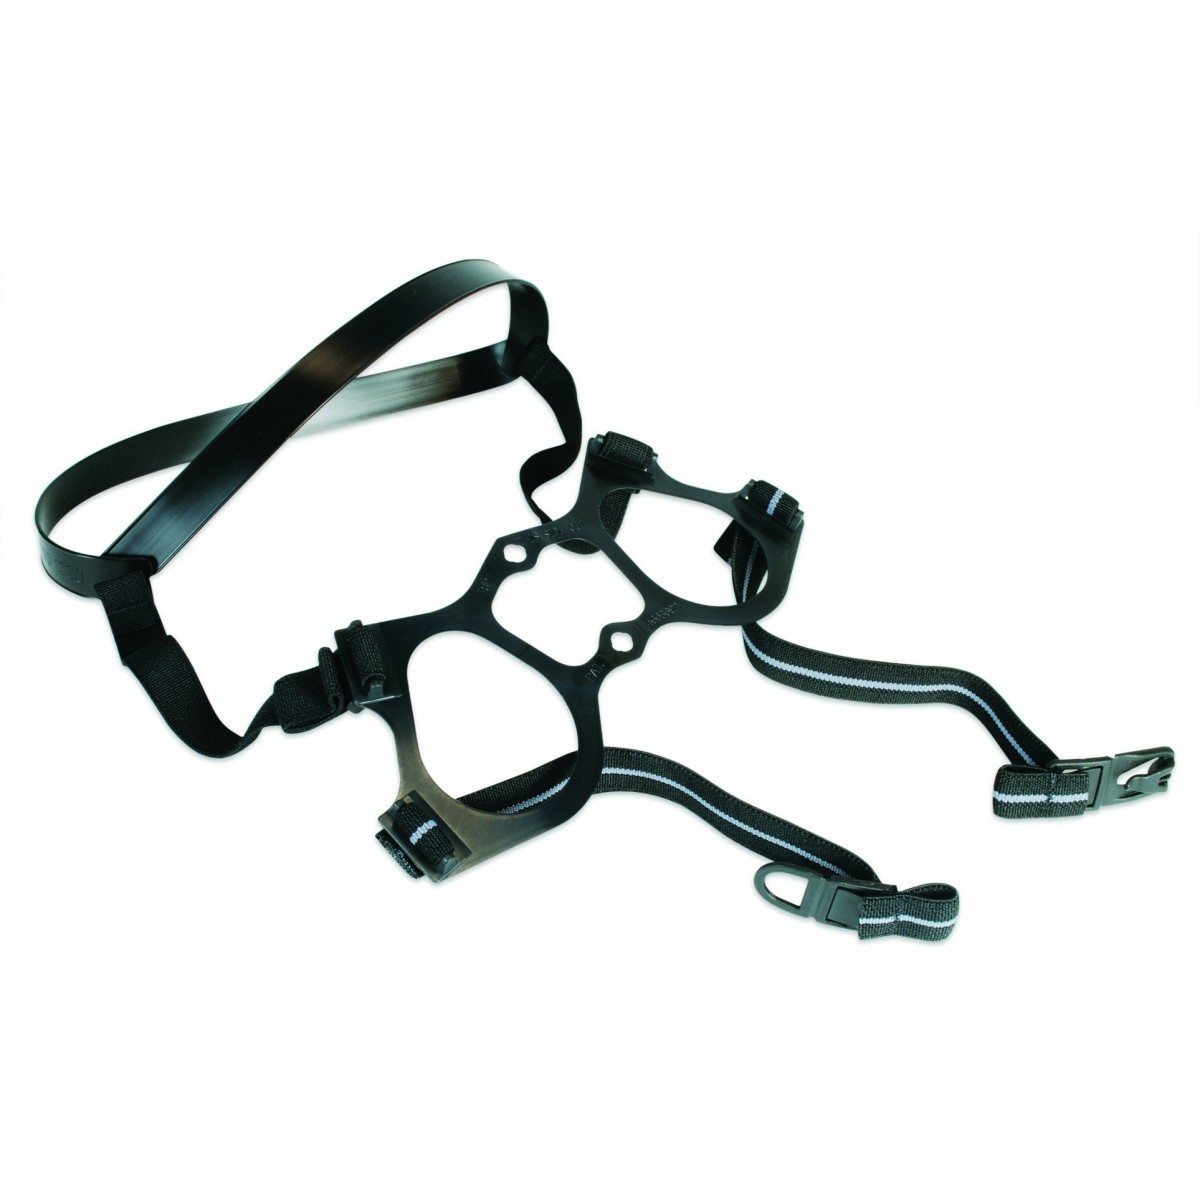 Honeywell Cradle Suspension Head Harness For 5500/7700 (Availability restrictions apply.)